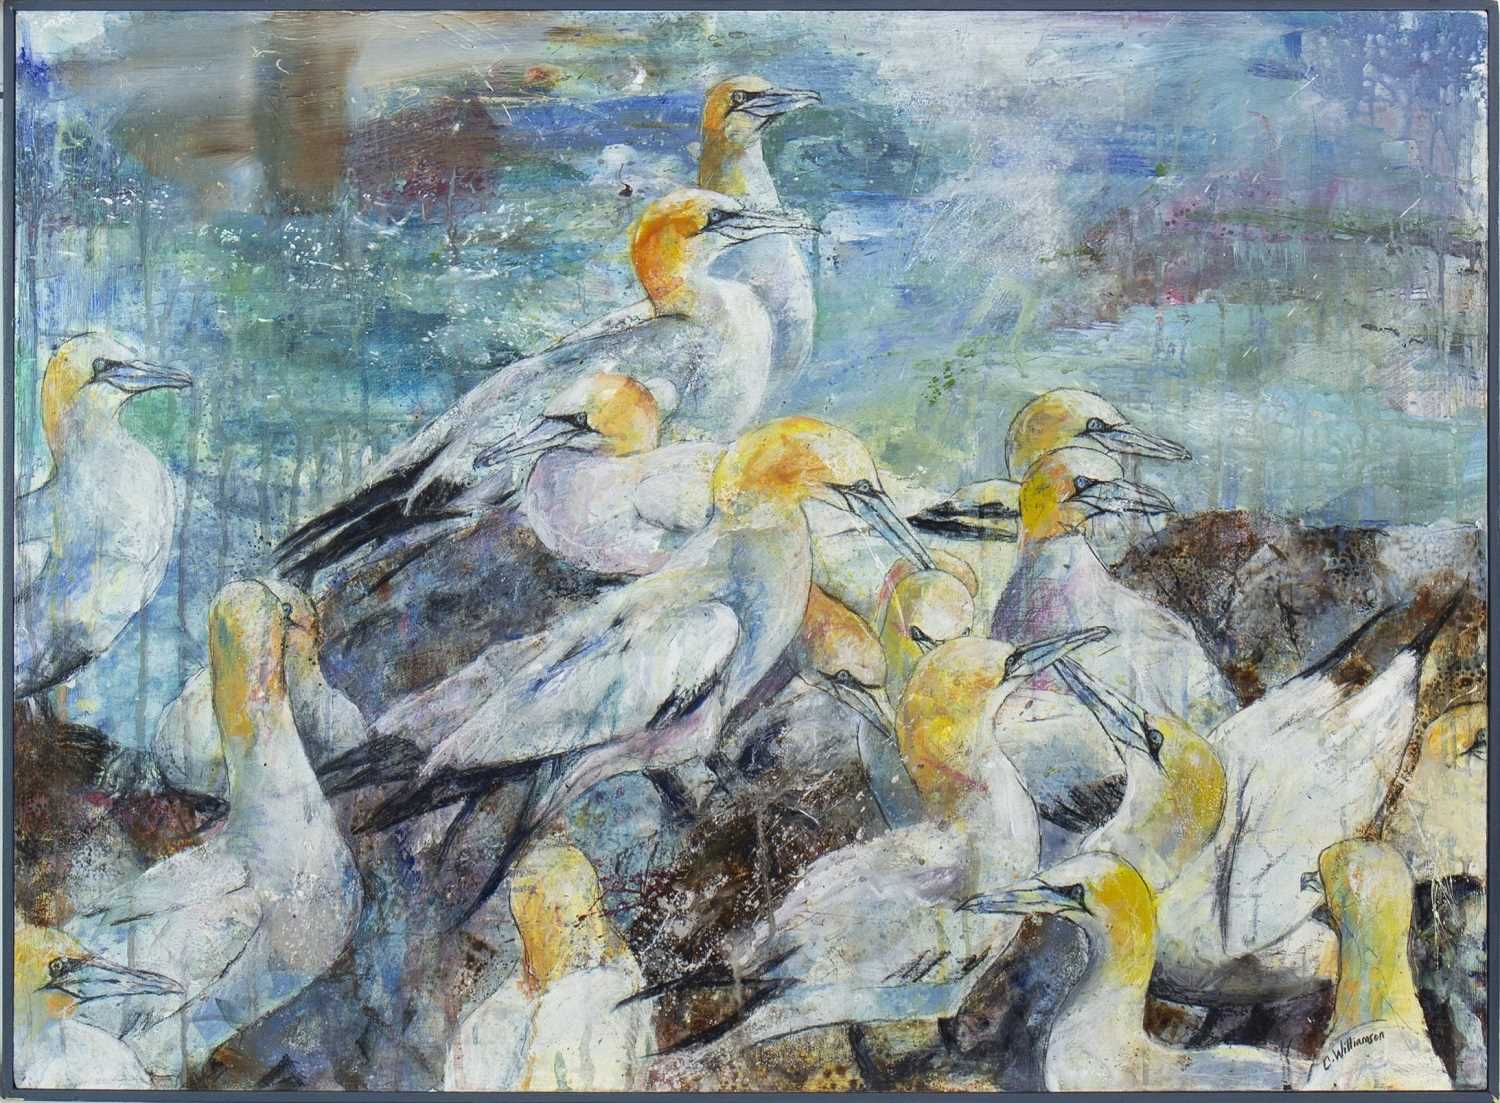 Lot 518 - ANOTHER DAY ON GANNET ROCK, A MIXED MEDIA BY C WILLIAMSON